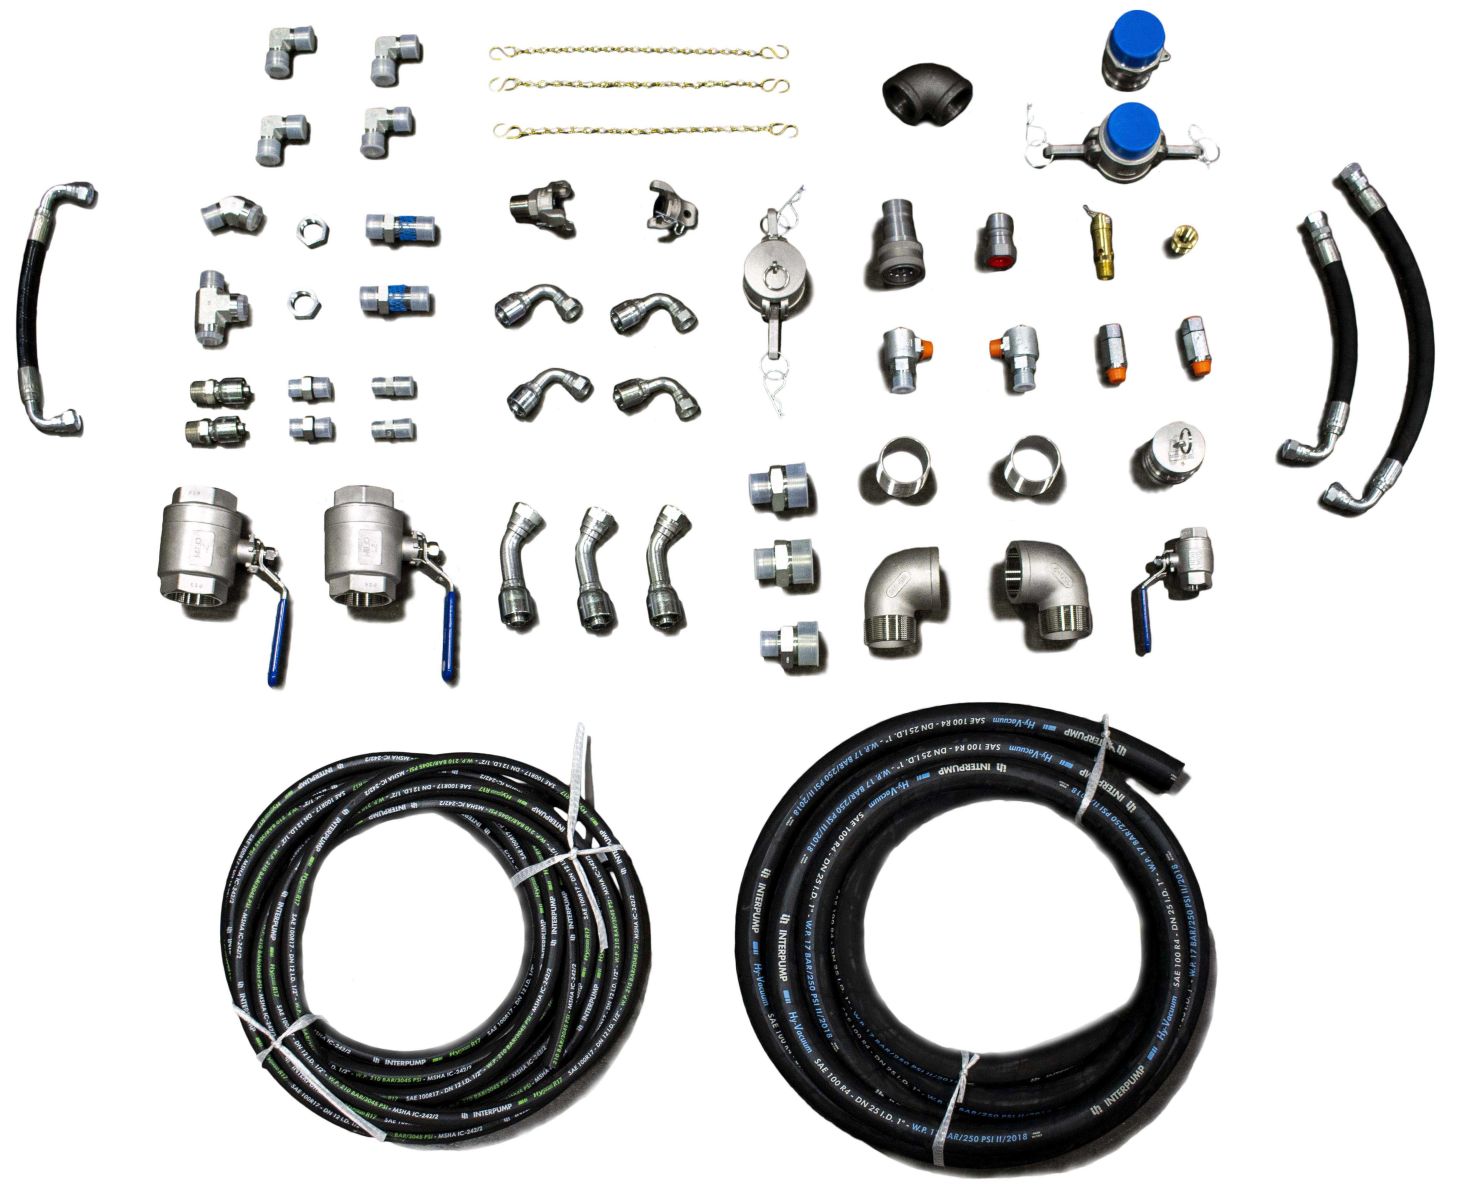 An image of a flat lay showing various parts of a custom kit and what can be included in a kit.